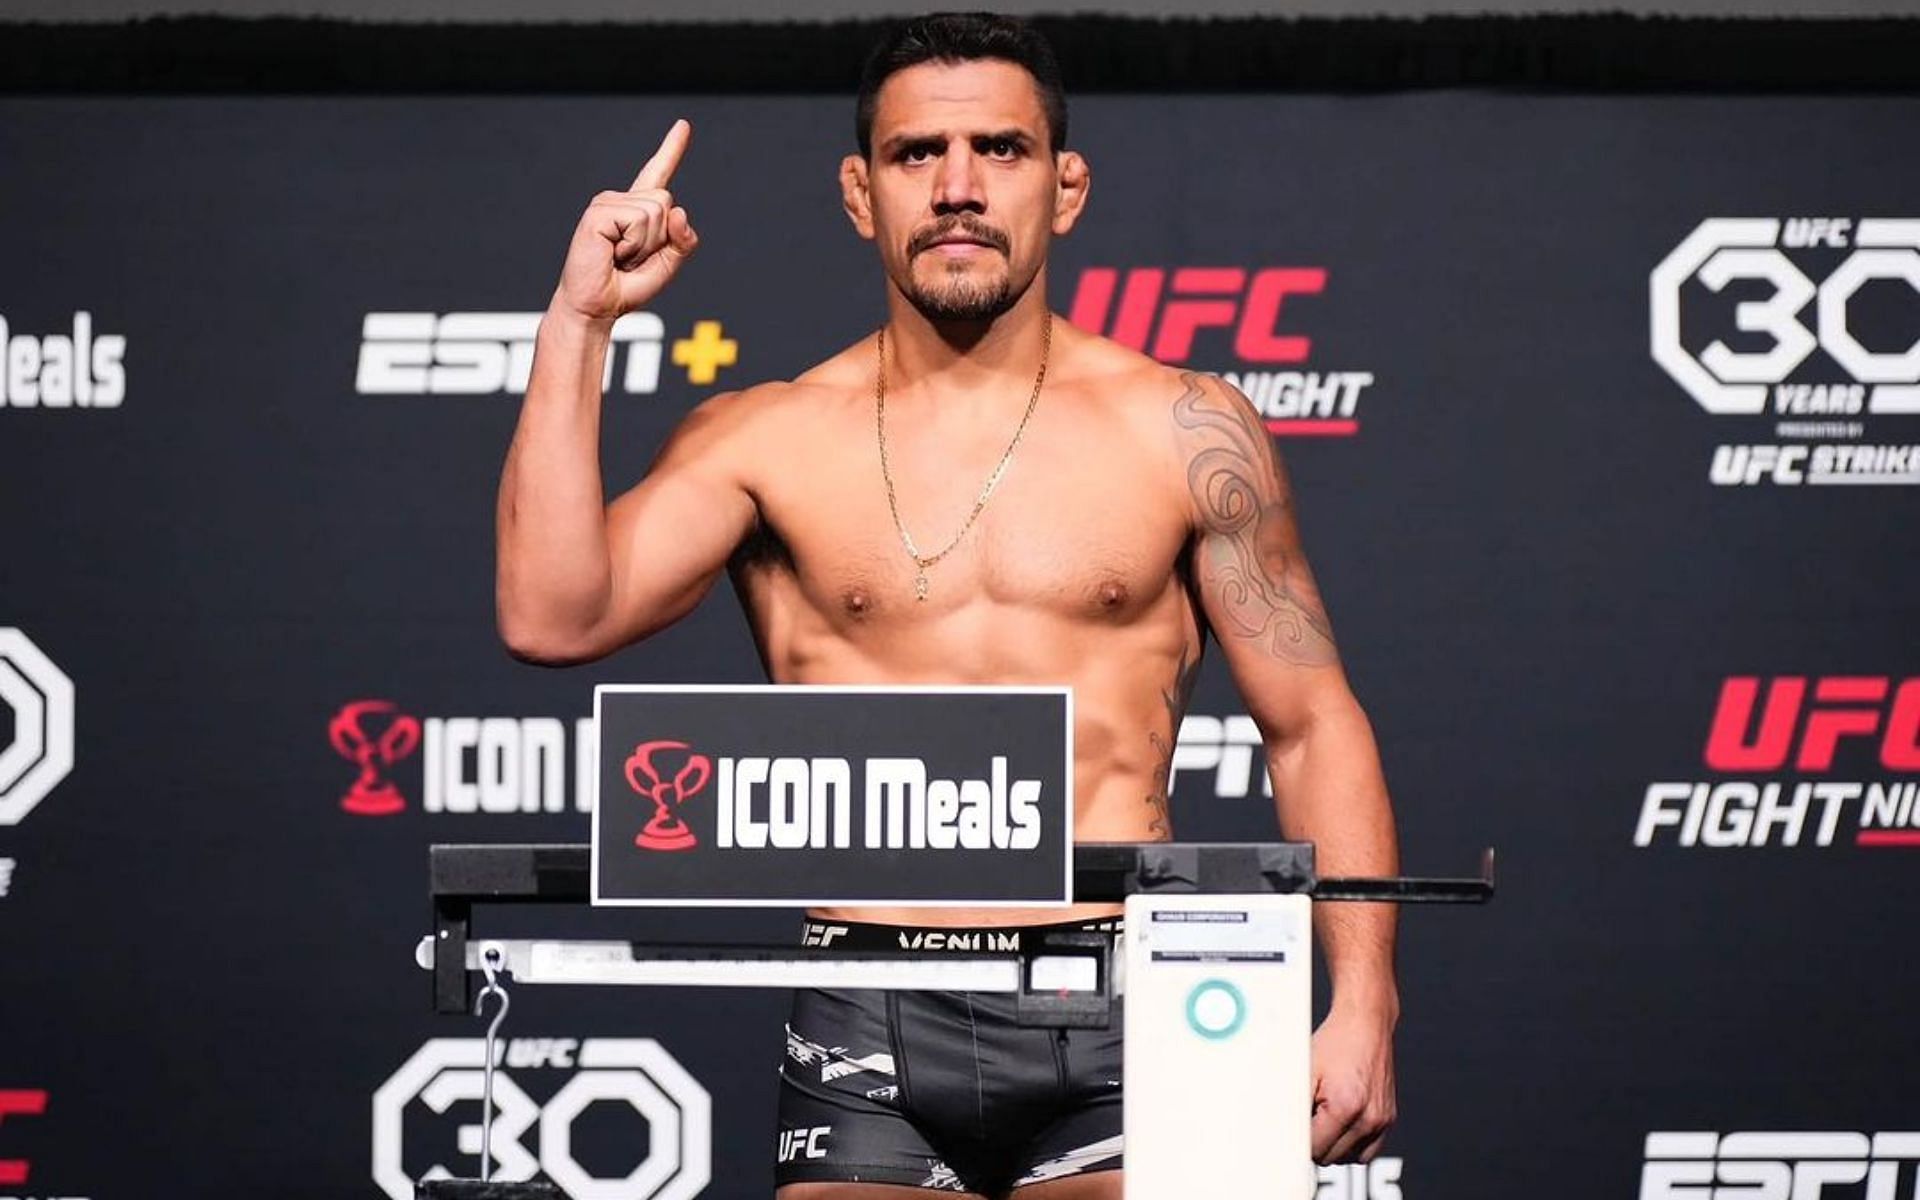 Rafael dos Anjos bids farewell to lightweight division, eyes fresh challenges at welterweight